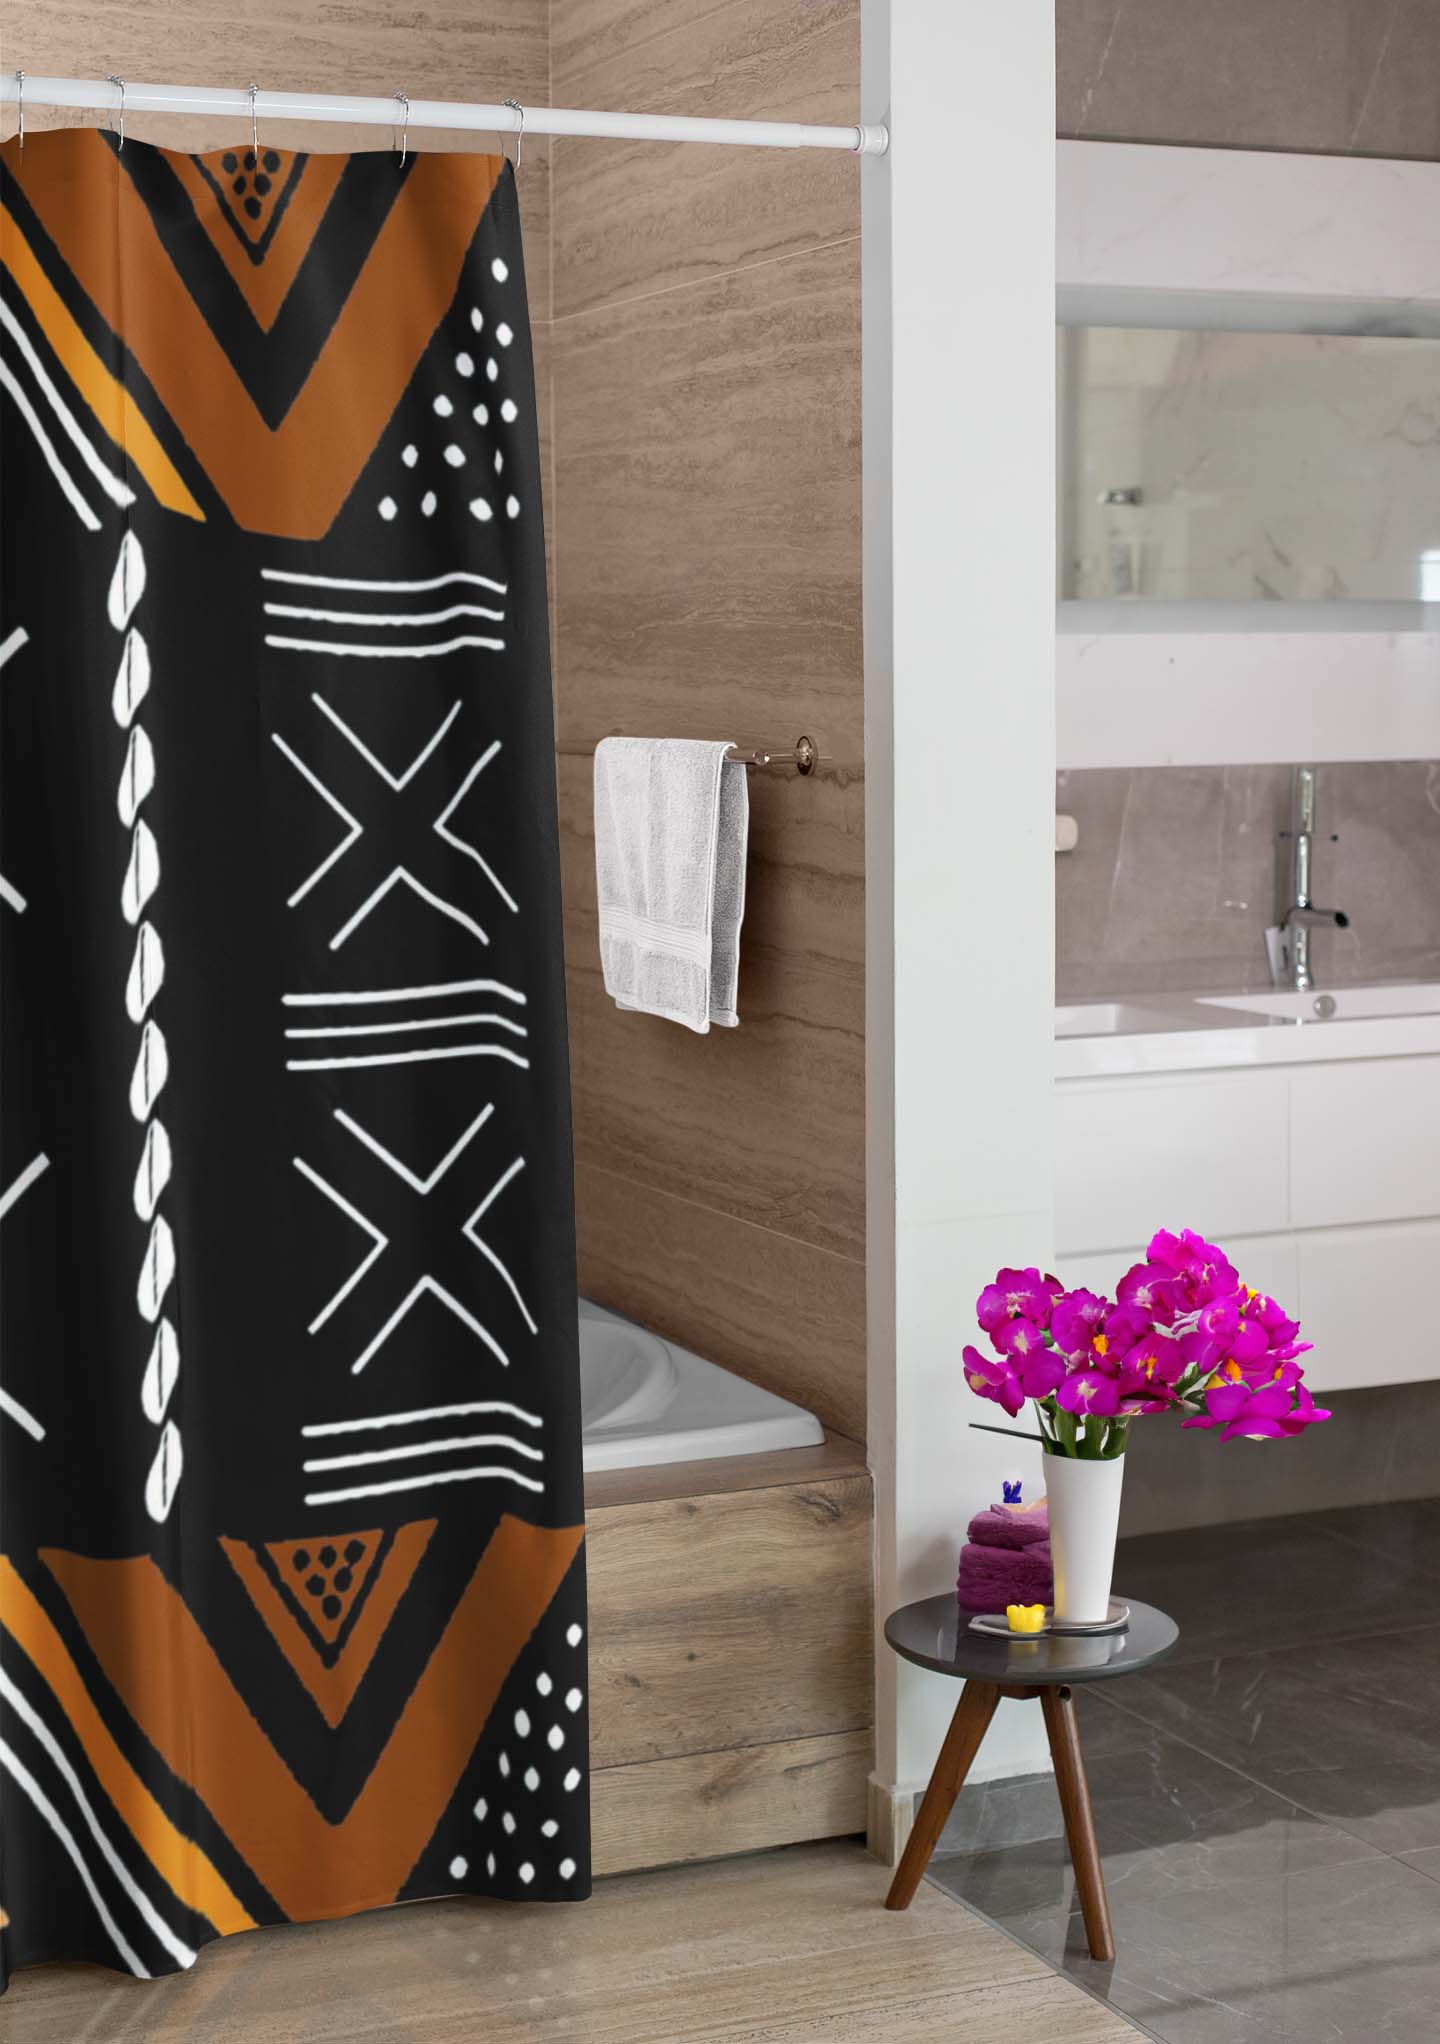 African Mudcloth Shower Curtain | Unique Print - Bynelo